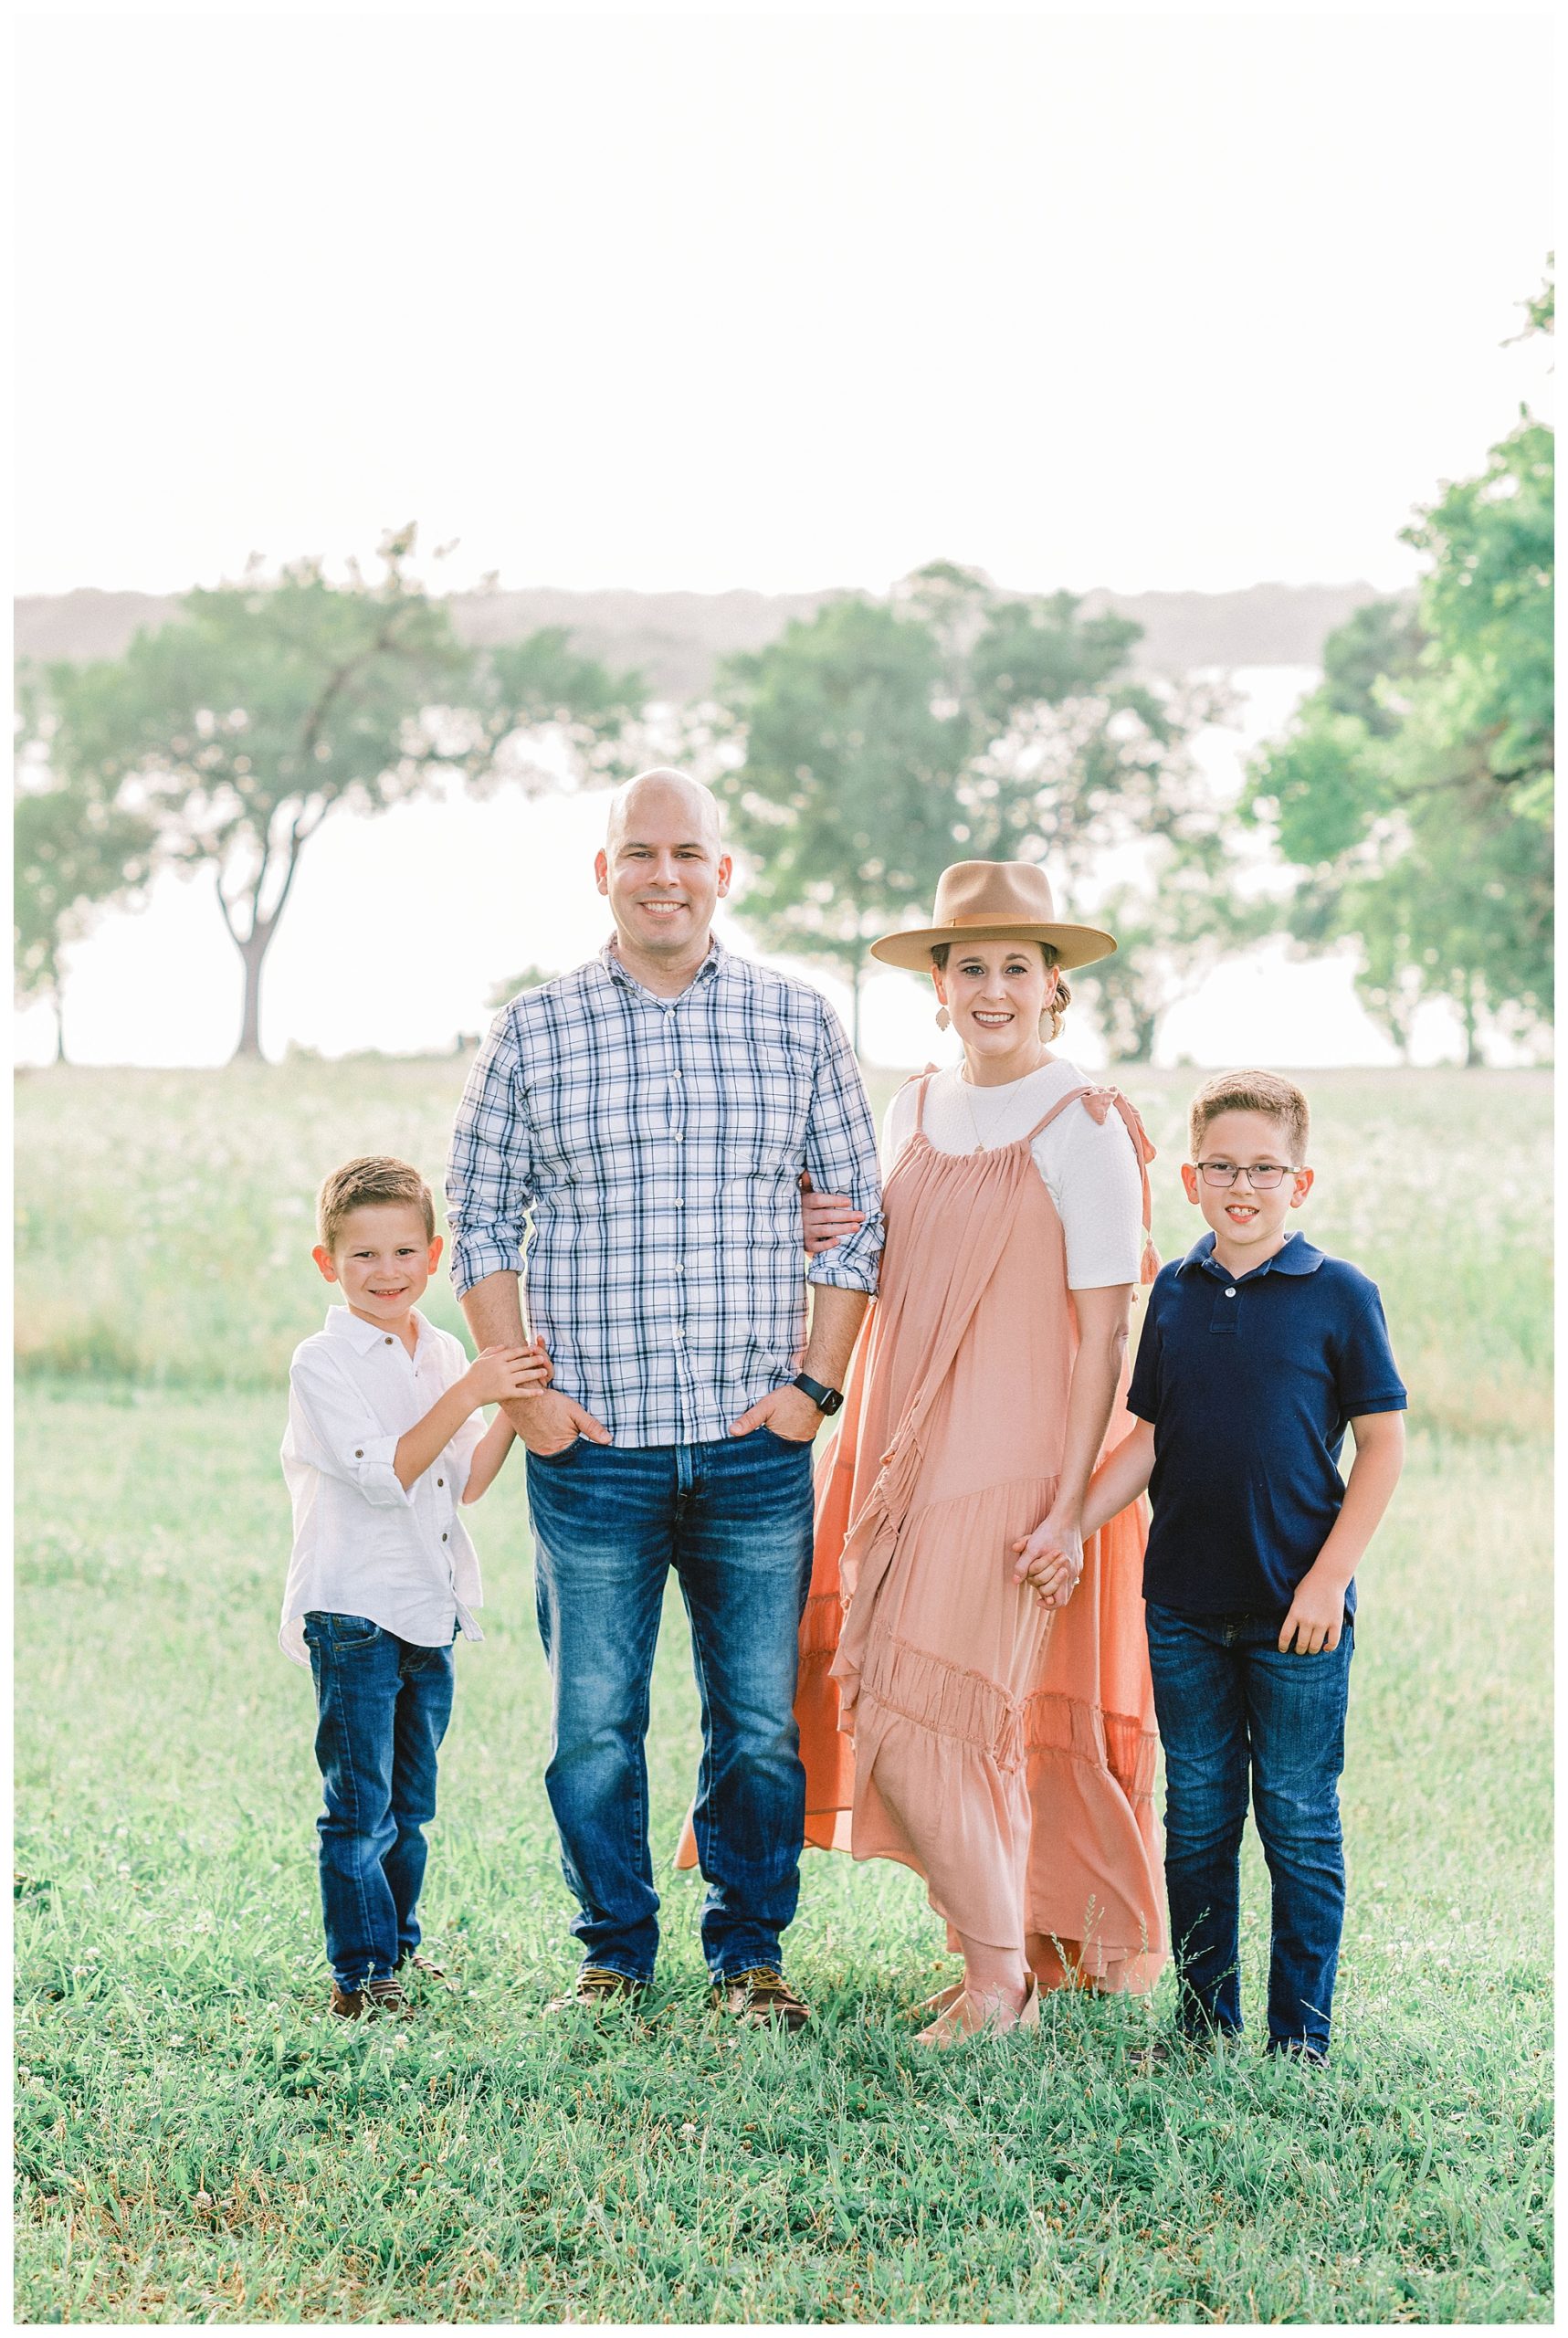 Tips for family session